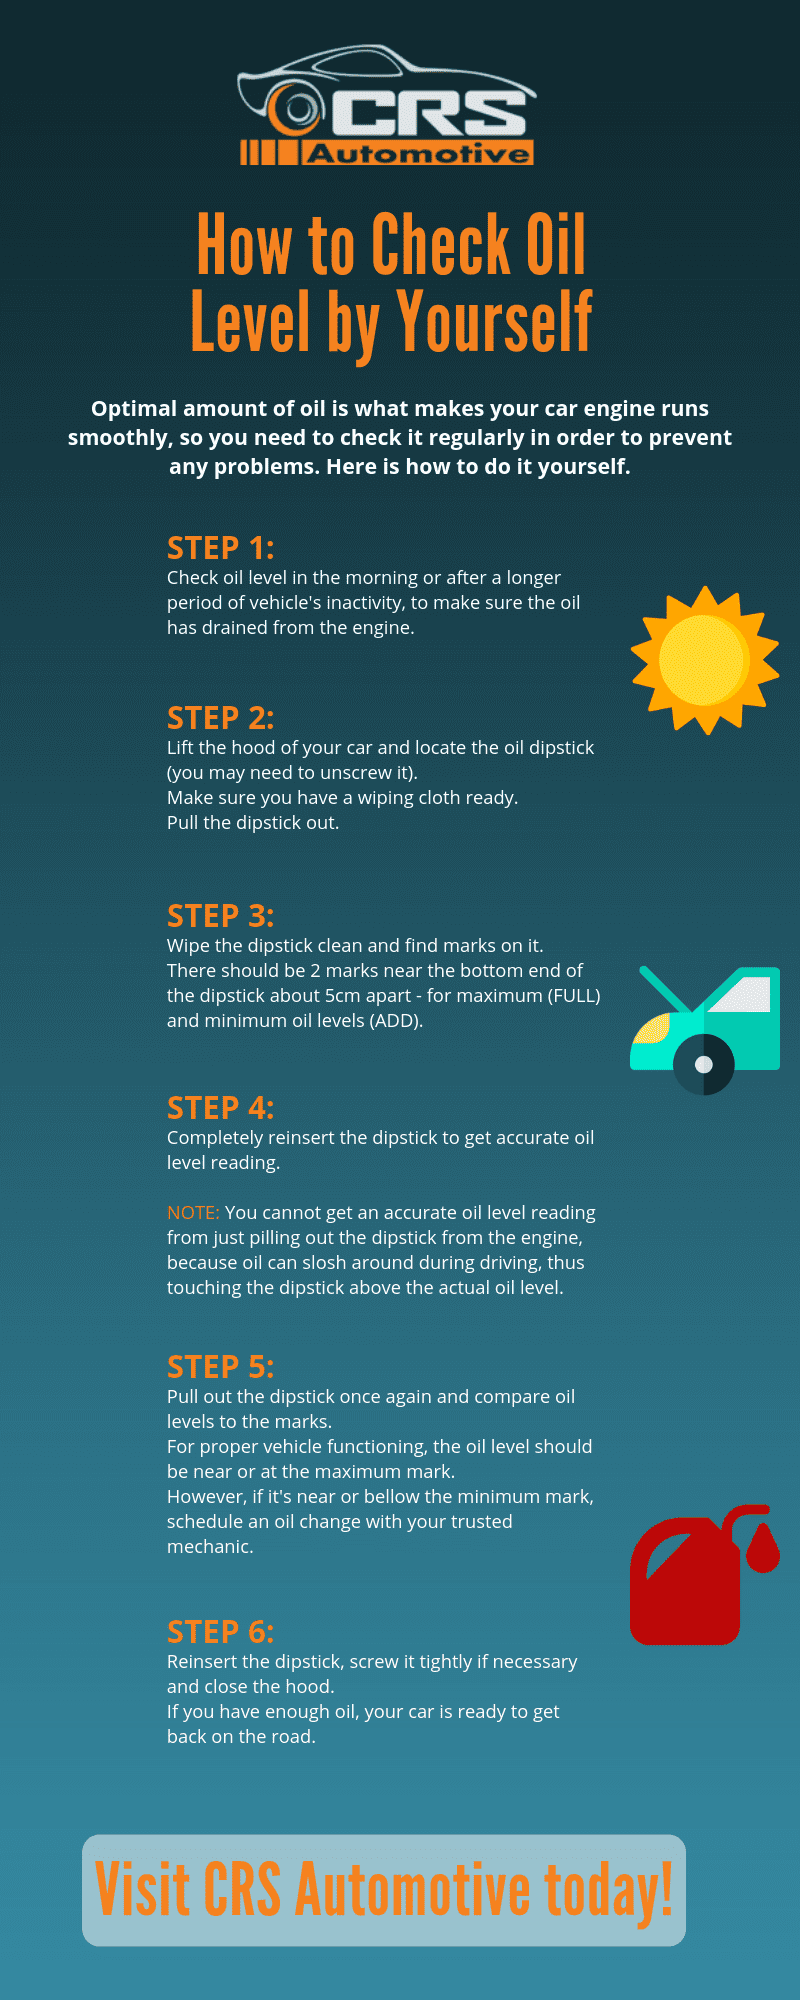 How to Check Oil Level by Yourself - Infographic